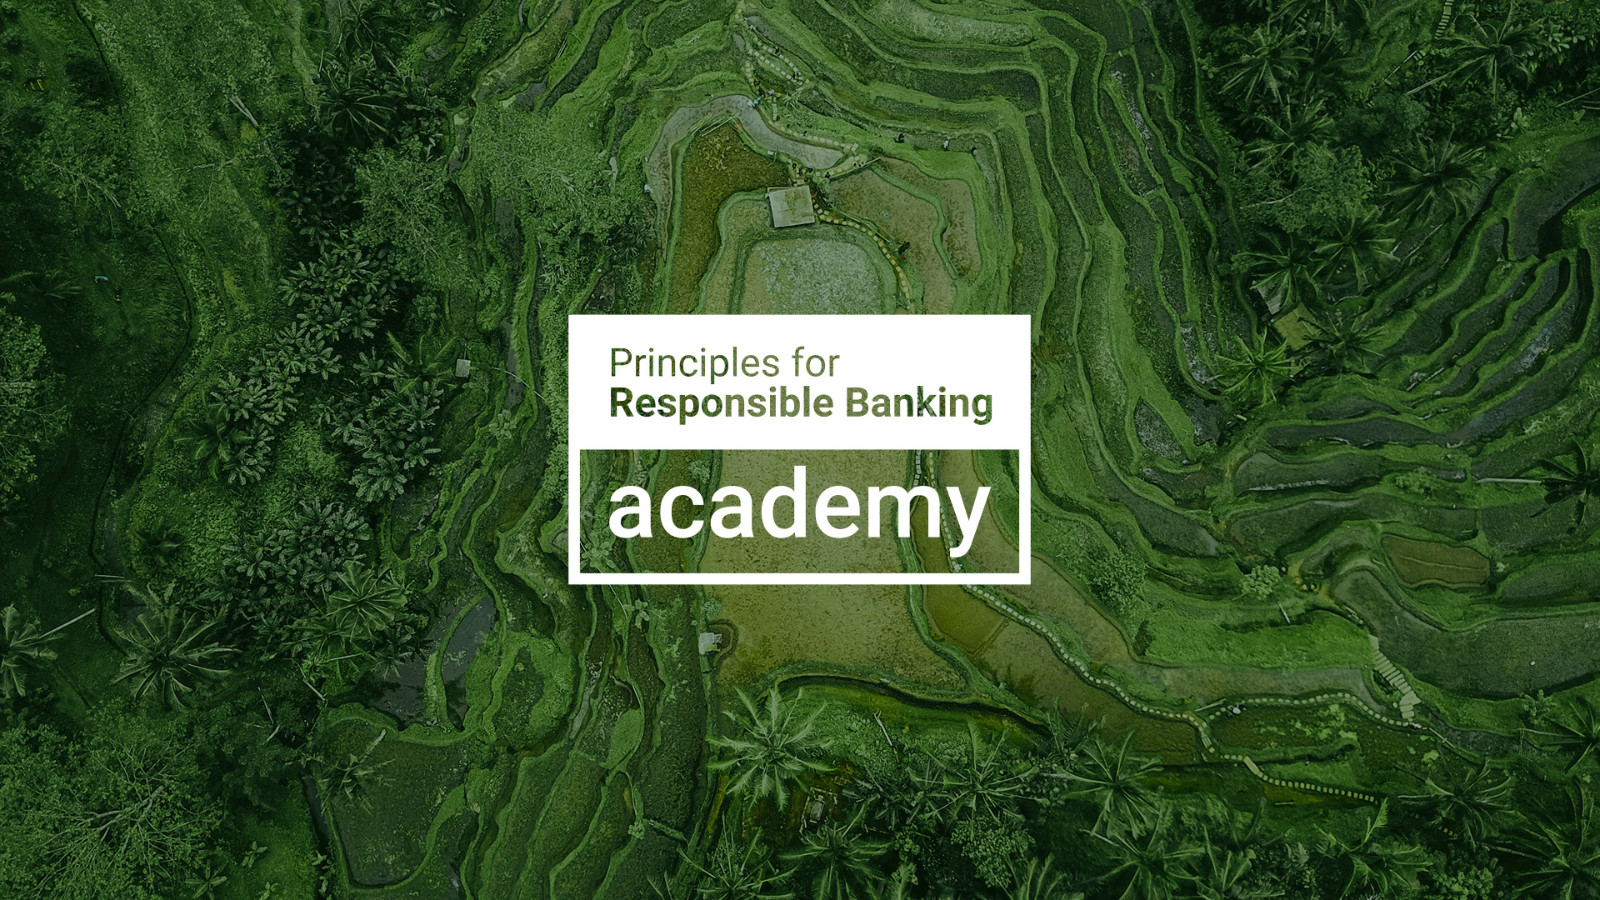 New Principles for Responsible Banking Academy to mainstream sustainability training